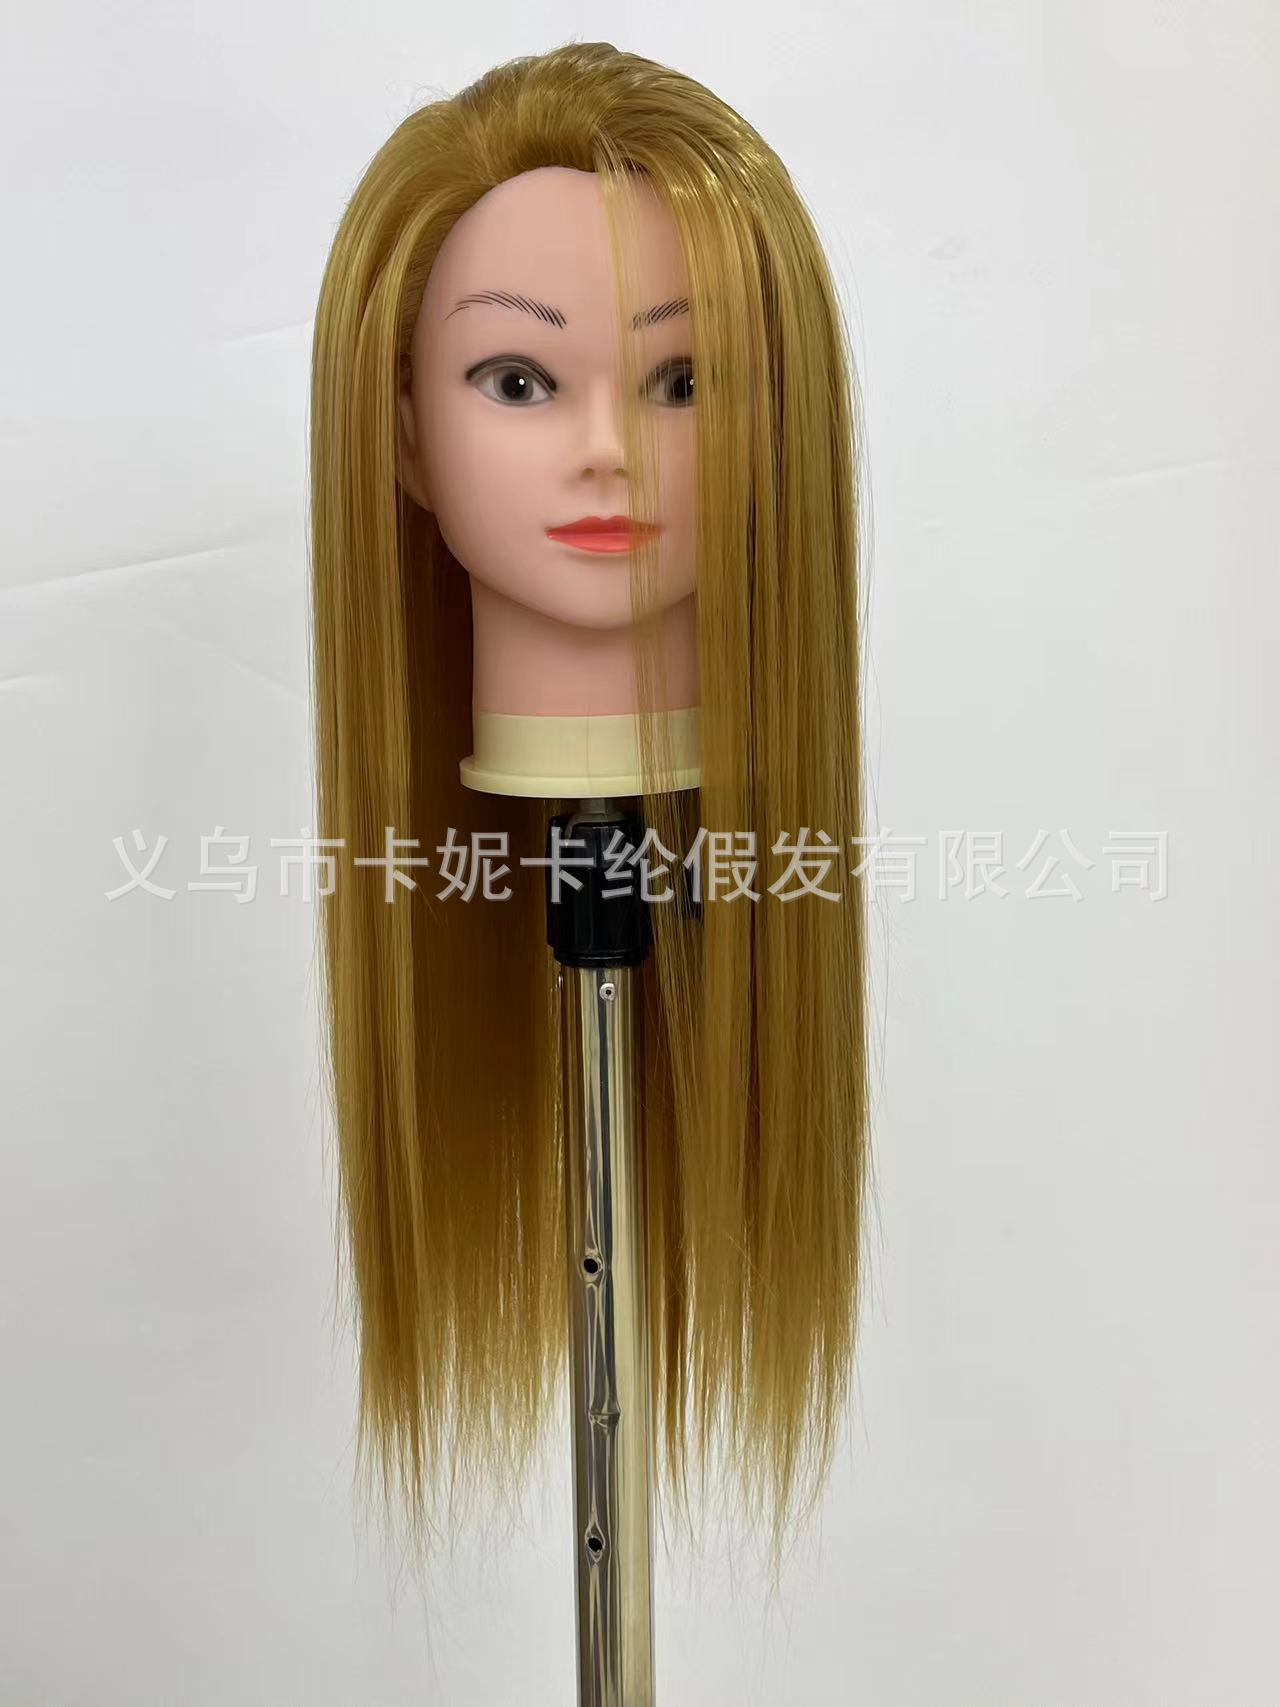 new head model teaching head hair cutting can be dyed and ironed curly golden wig mannequin head he lace frontal